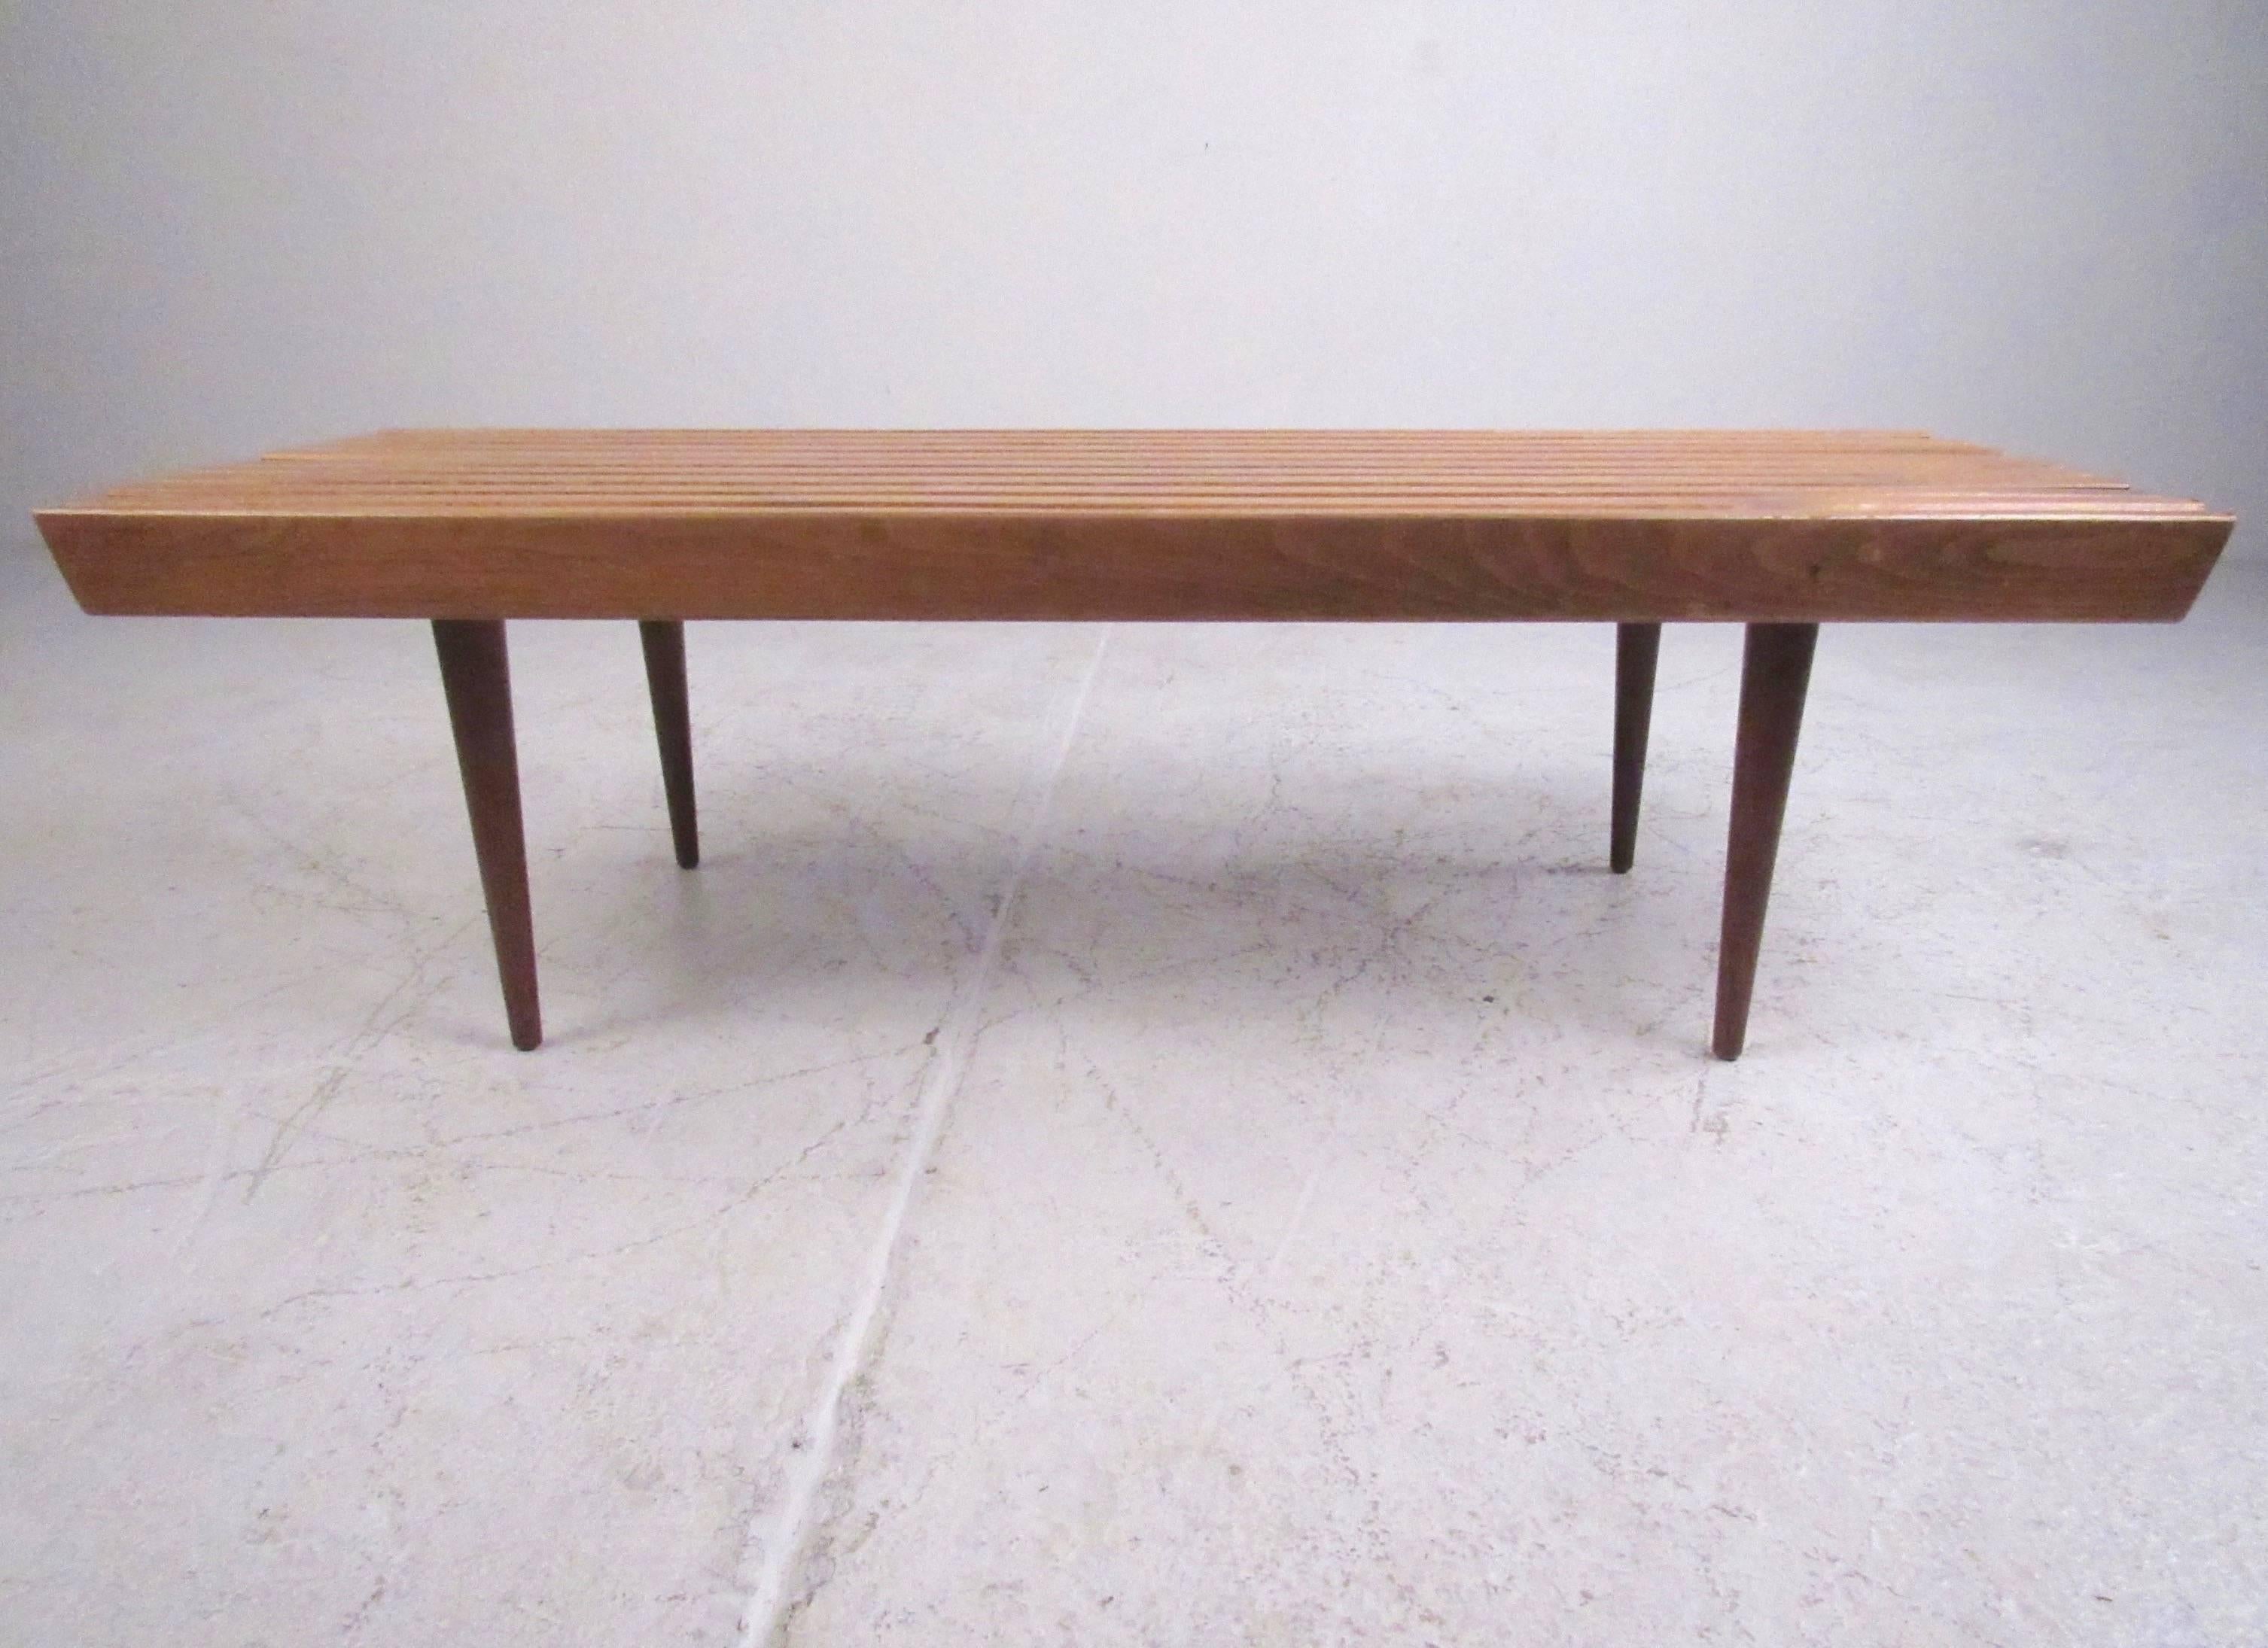 This stylish vintage coffee table features slat walnut construction and tapered hardwood legs. The sturdy Mid-Century construction makes this a perfect choice for living room coffee table or for use as a bench for occasional seating. Please confirm